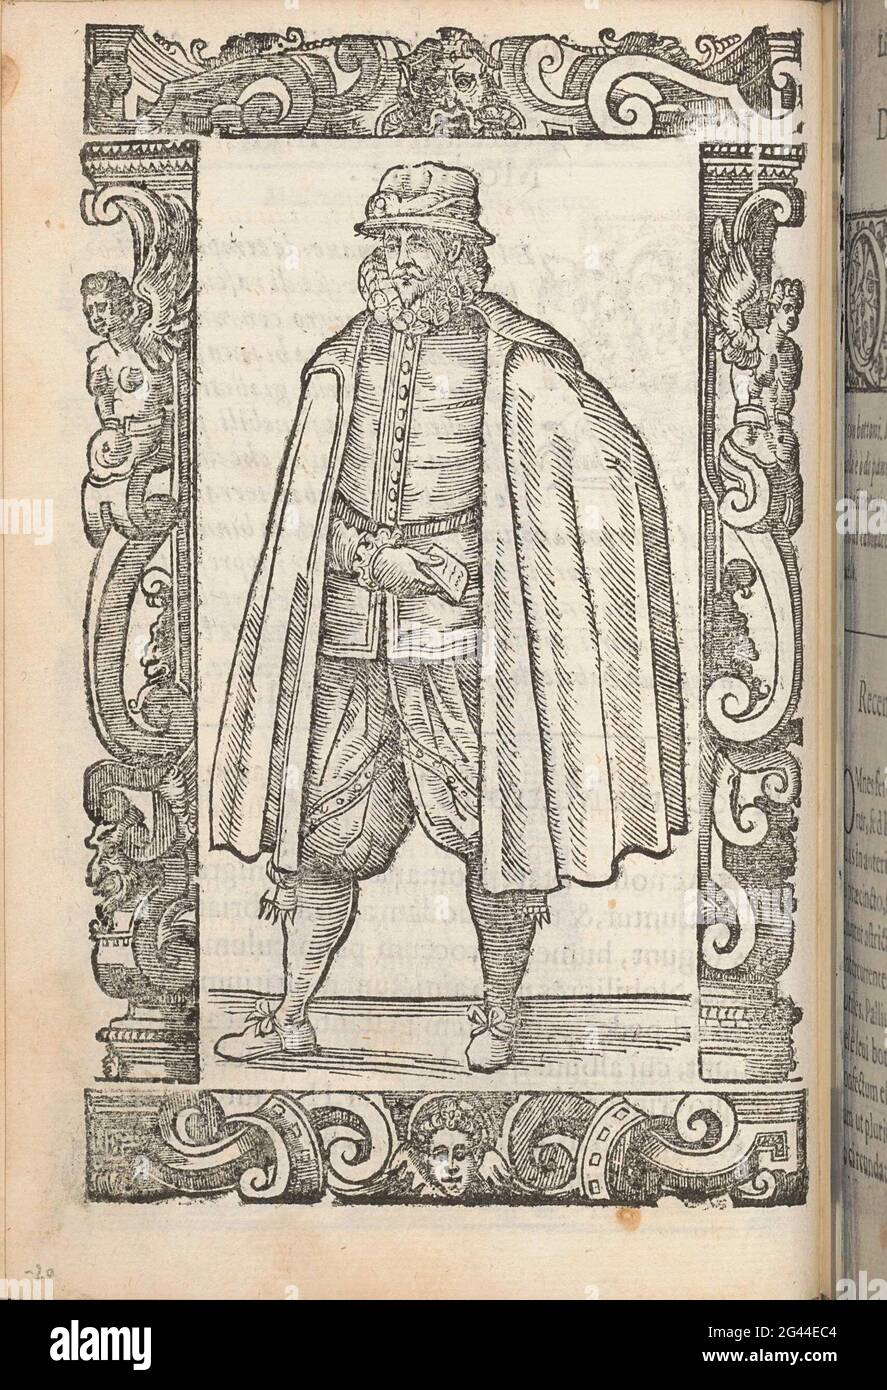 Merchant from Rome; The Roman merchants; Ancient habits, modern and modernisms around the world: new accesses of many figures: dressetus antiquorum, recentorumque totius orbis. Roman Merchant, To The Left, Dressed in Wide Shoulder Sheath About Jam and Puffing Knee Pants. Hat On The Head. In Ornament Edge. Stock Photo